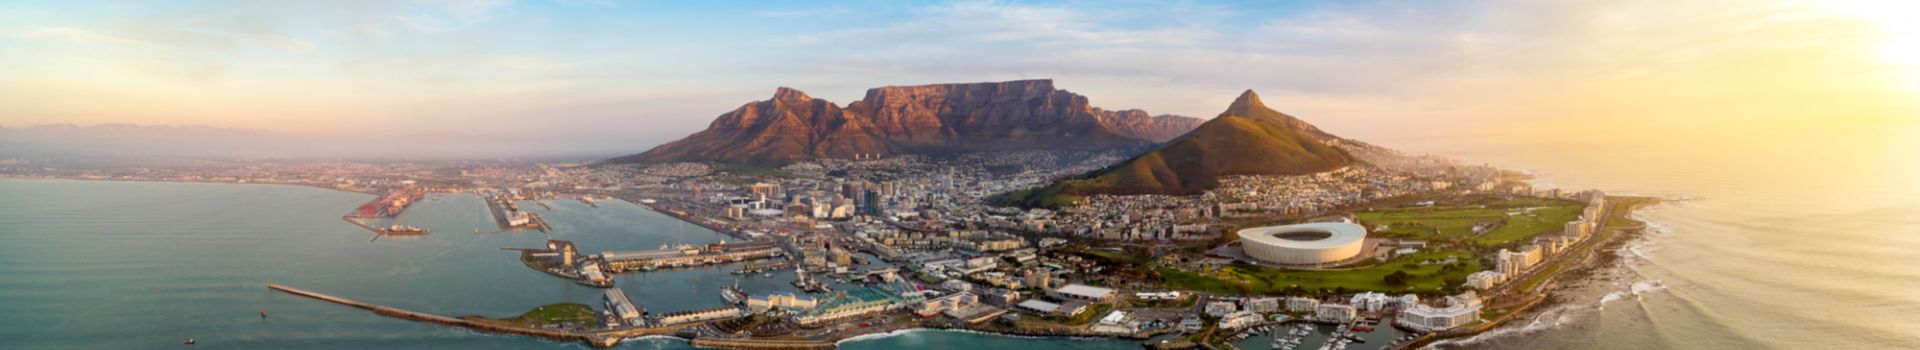 Things to do in Cape Town - Cassidy Travel Blog